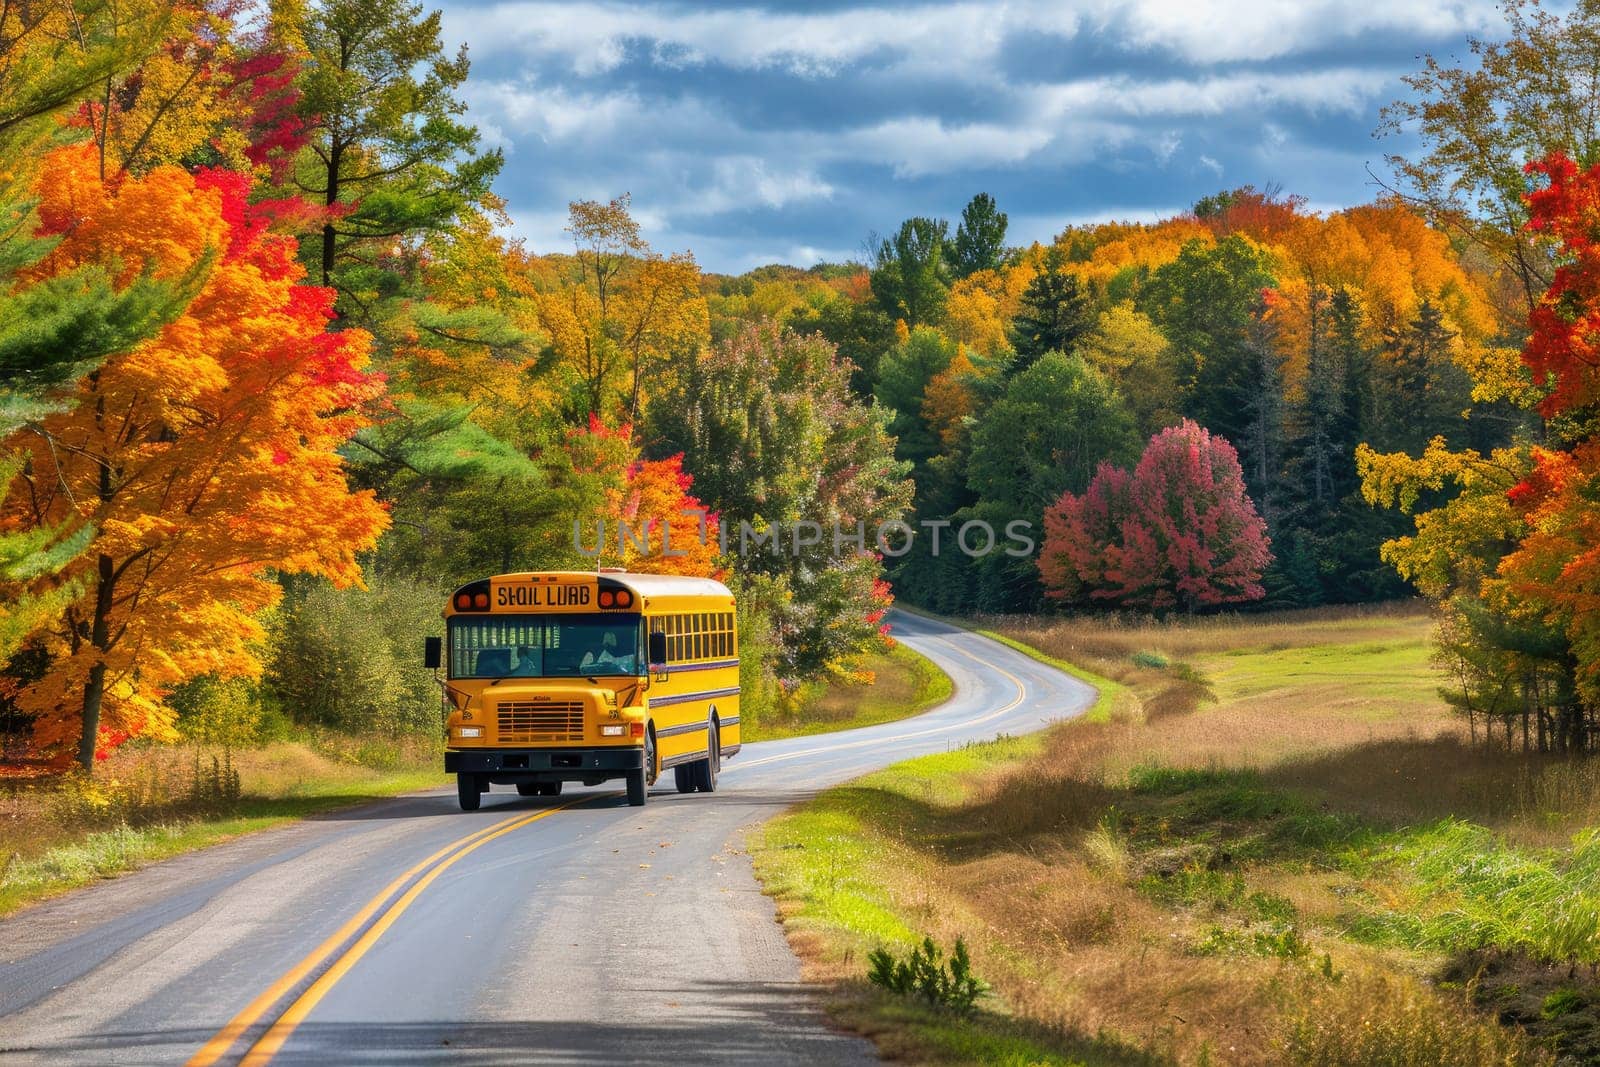 Bright yellow school bus drives along a scenic country road with vibrant fall foliage lining the way